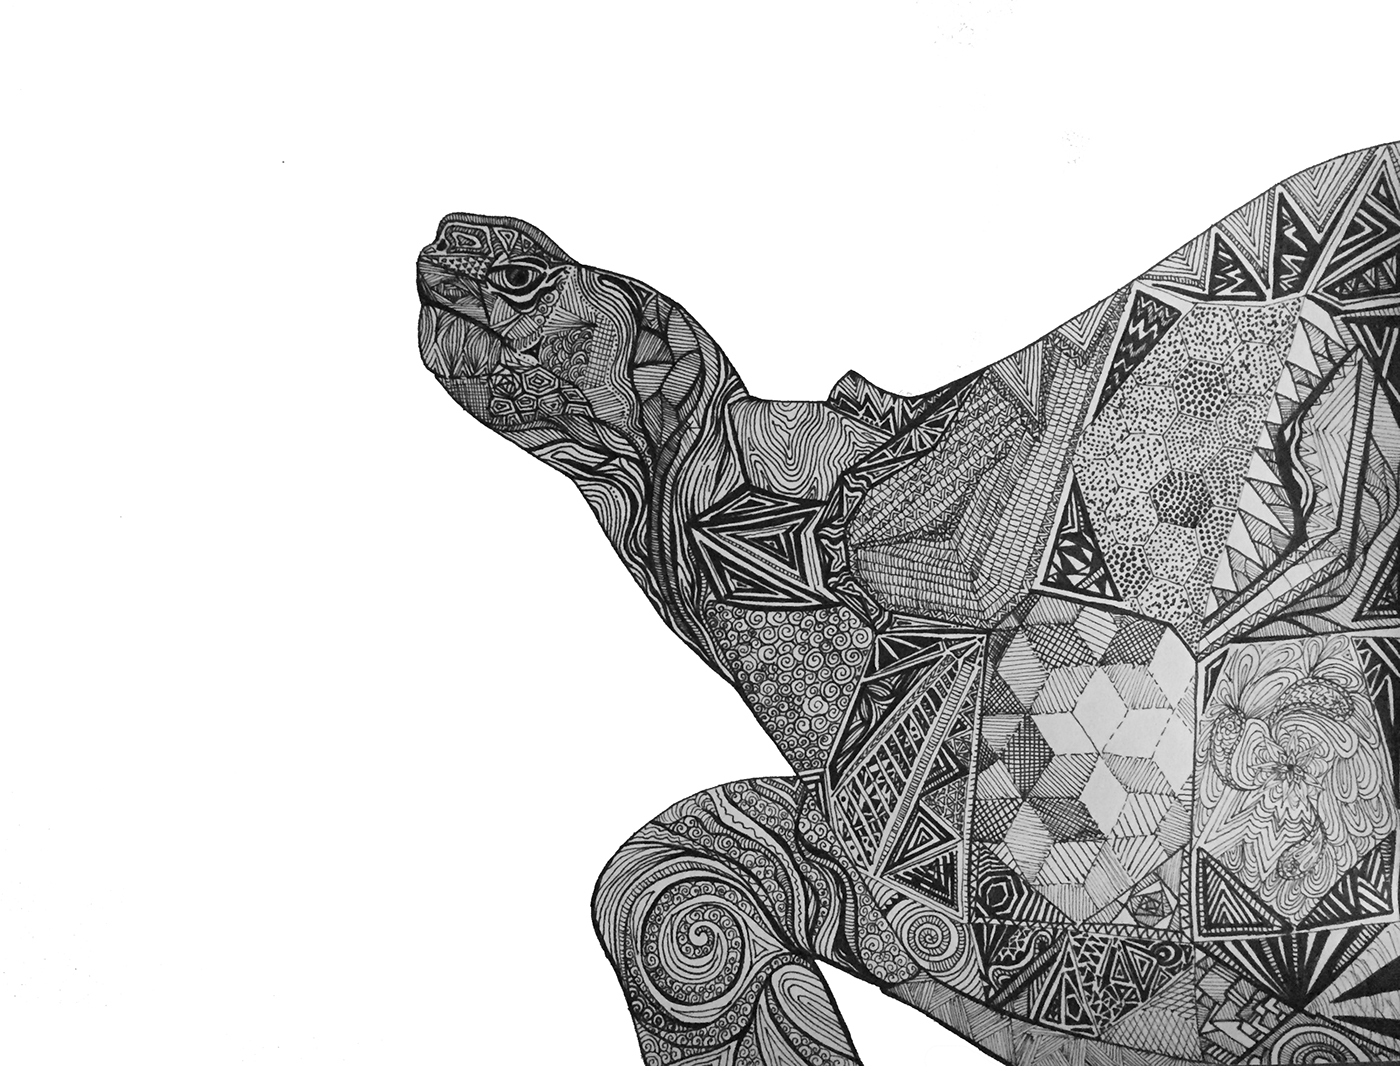 pen and ink Galapagos endangered species stanford California black and white Line drawings tortoise bird animals